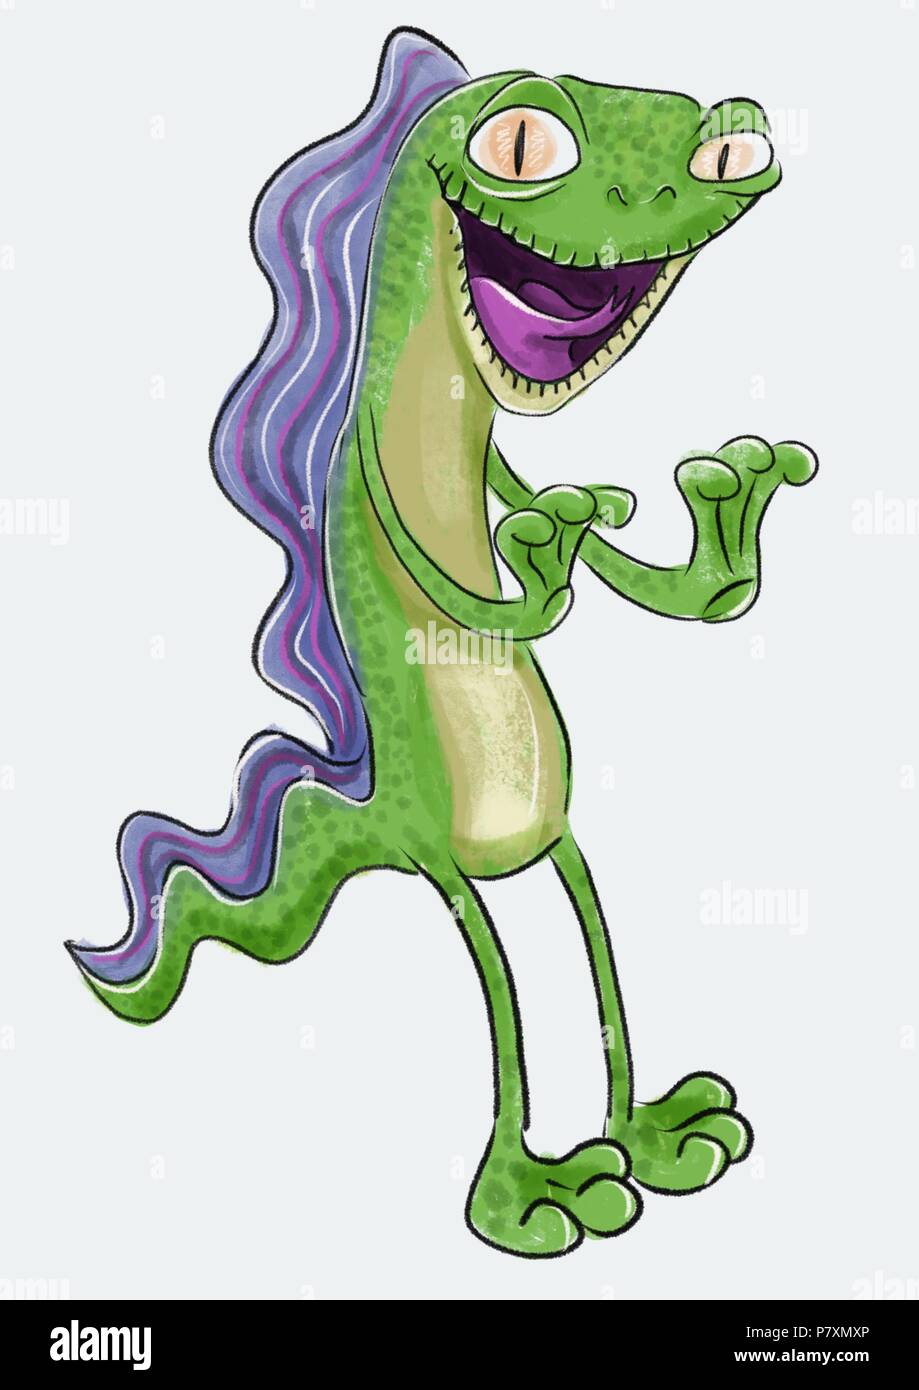 a cool happy newt character illustration Stock Photo